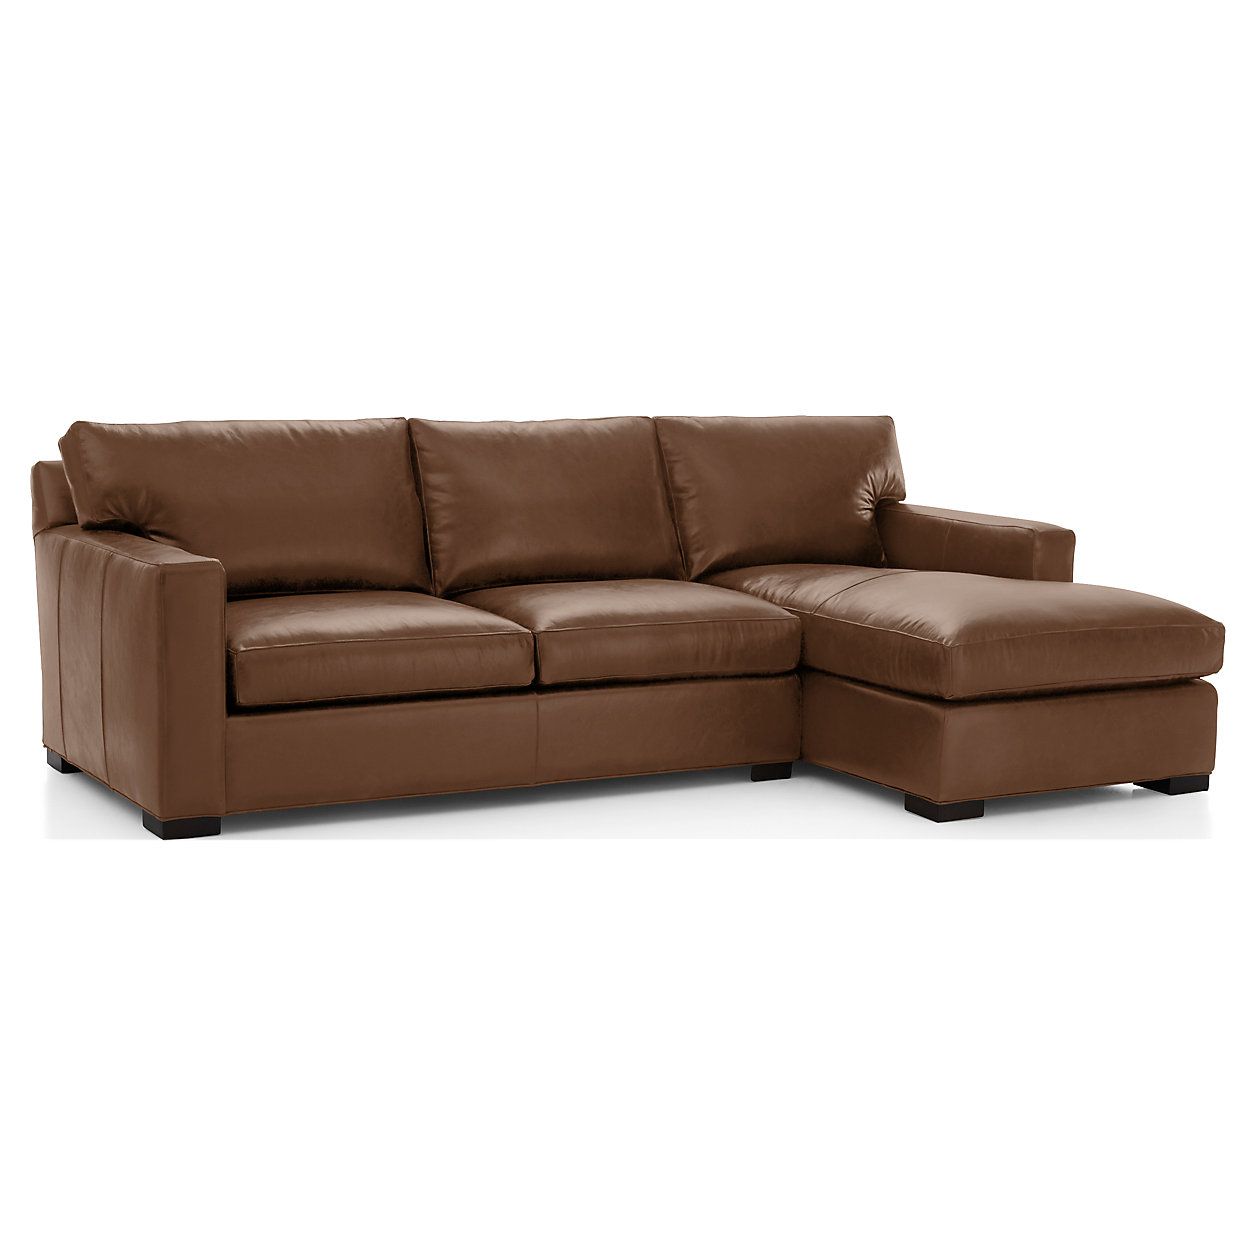 Axis Leather 2-Piece Sectional + Reviews | Crate & Barrel | Crate & Barrel